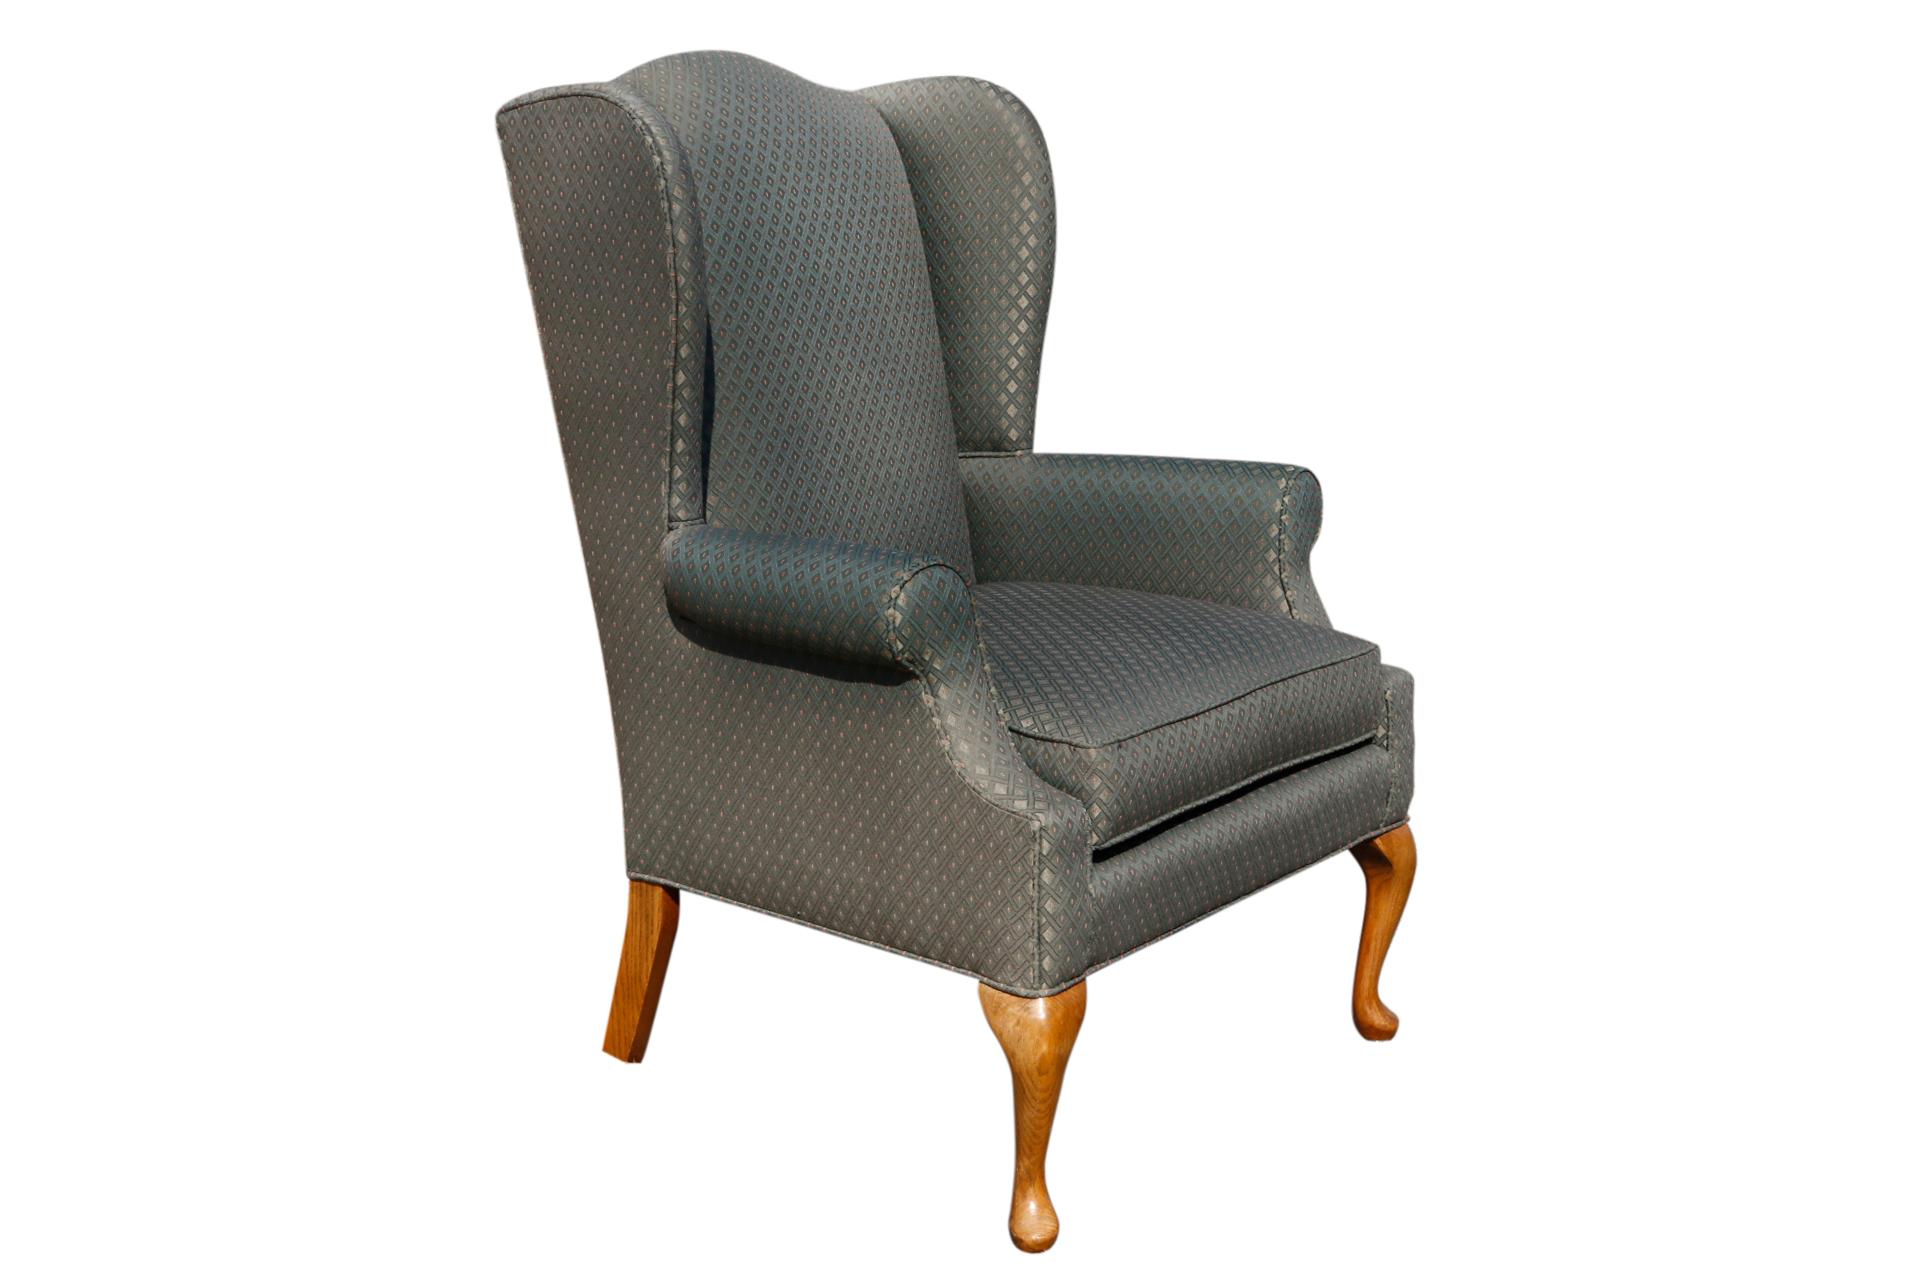 A pair of Queen Anne style wingback chairs made by C.R. Laine for their Carolina collection. Upholstered throughout in an green jacquard fabric with a diamond motif. Cabriole legs finish in rounded pad feet. Arm height 25